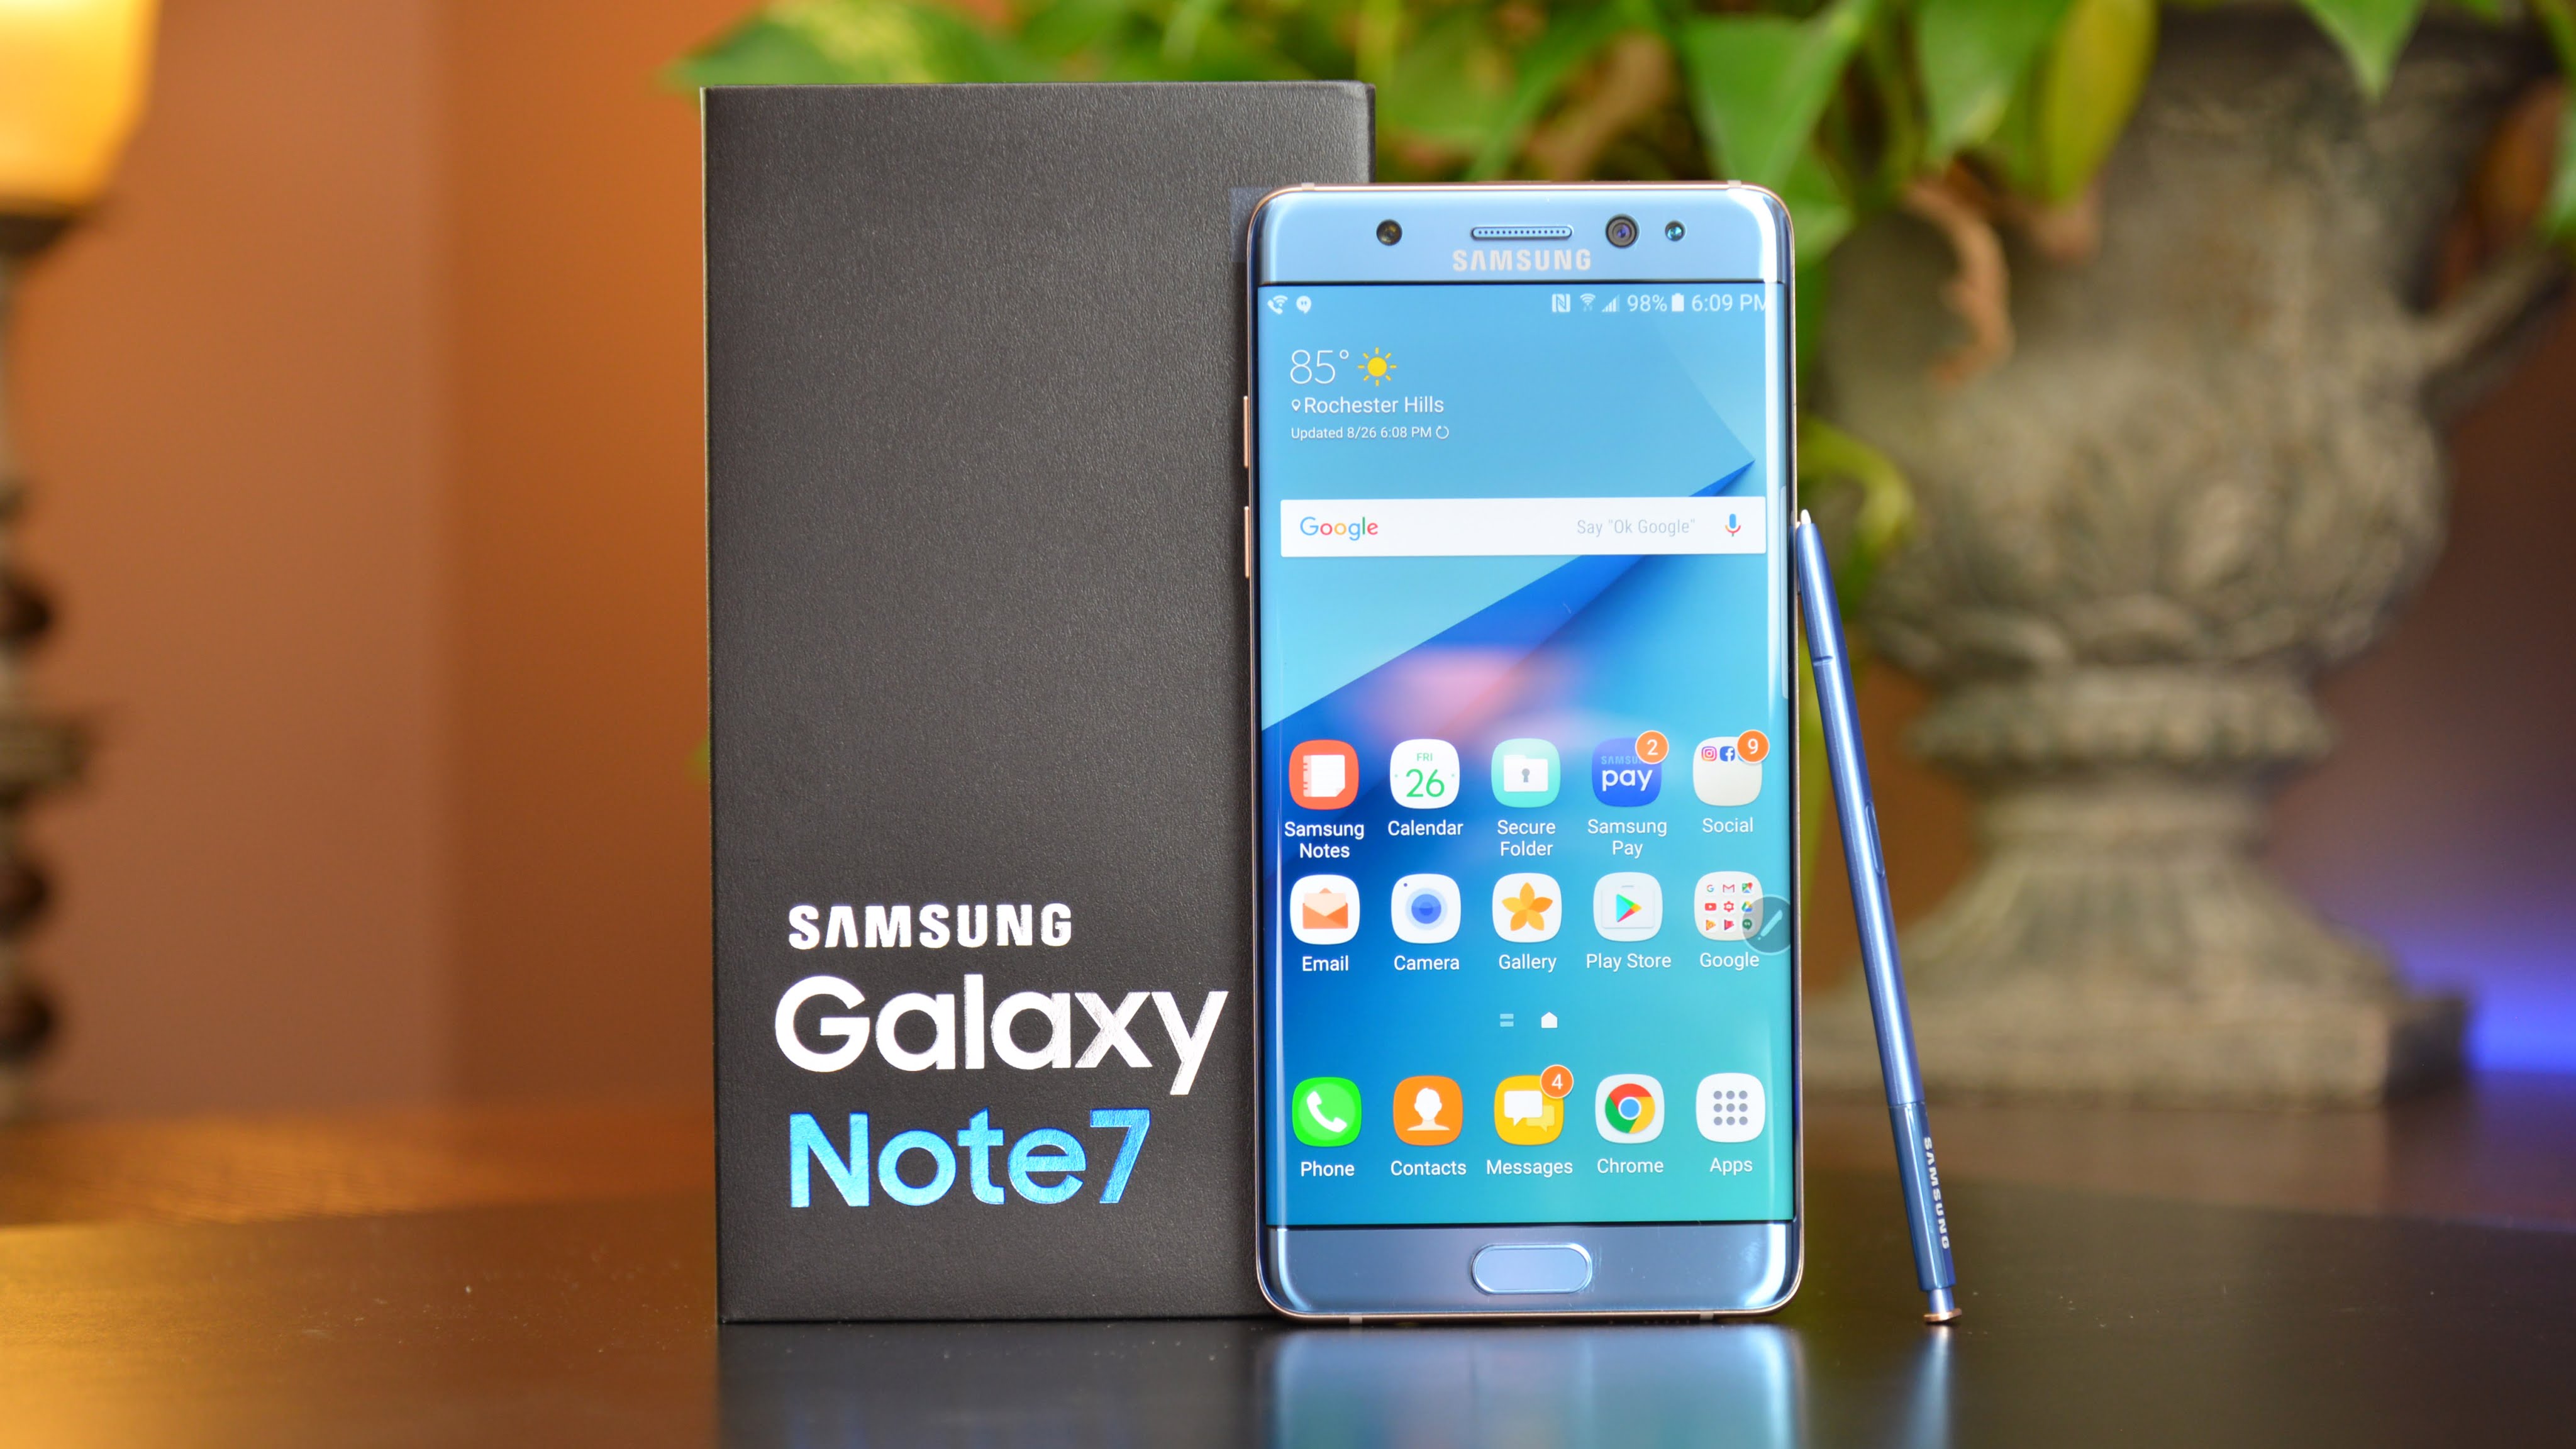 Refurbished Galaxy Note 7s will be released on the market, except India and U.S